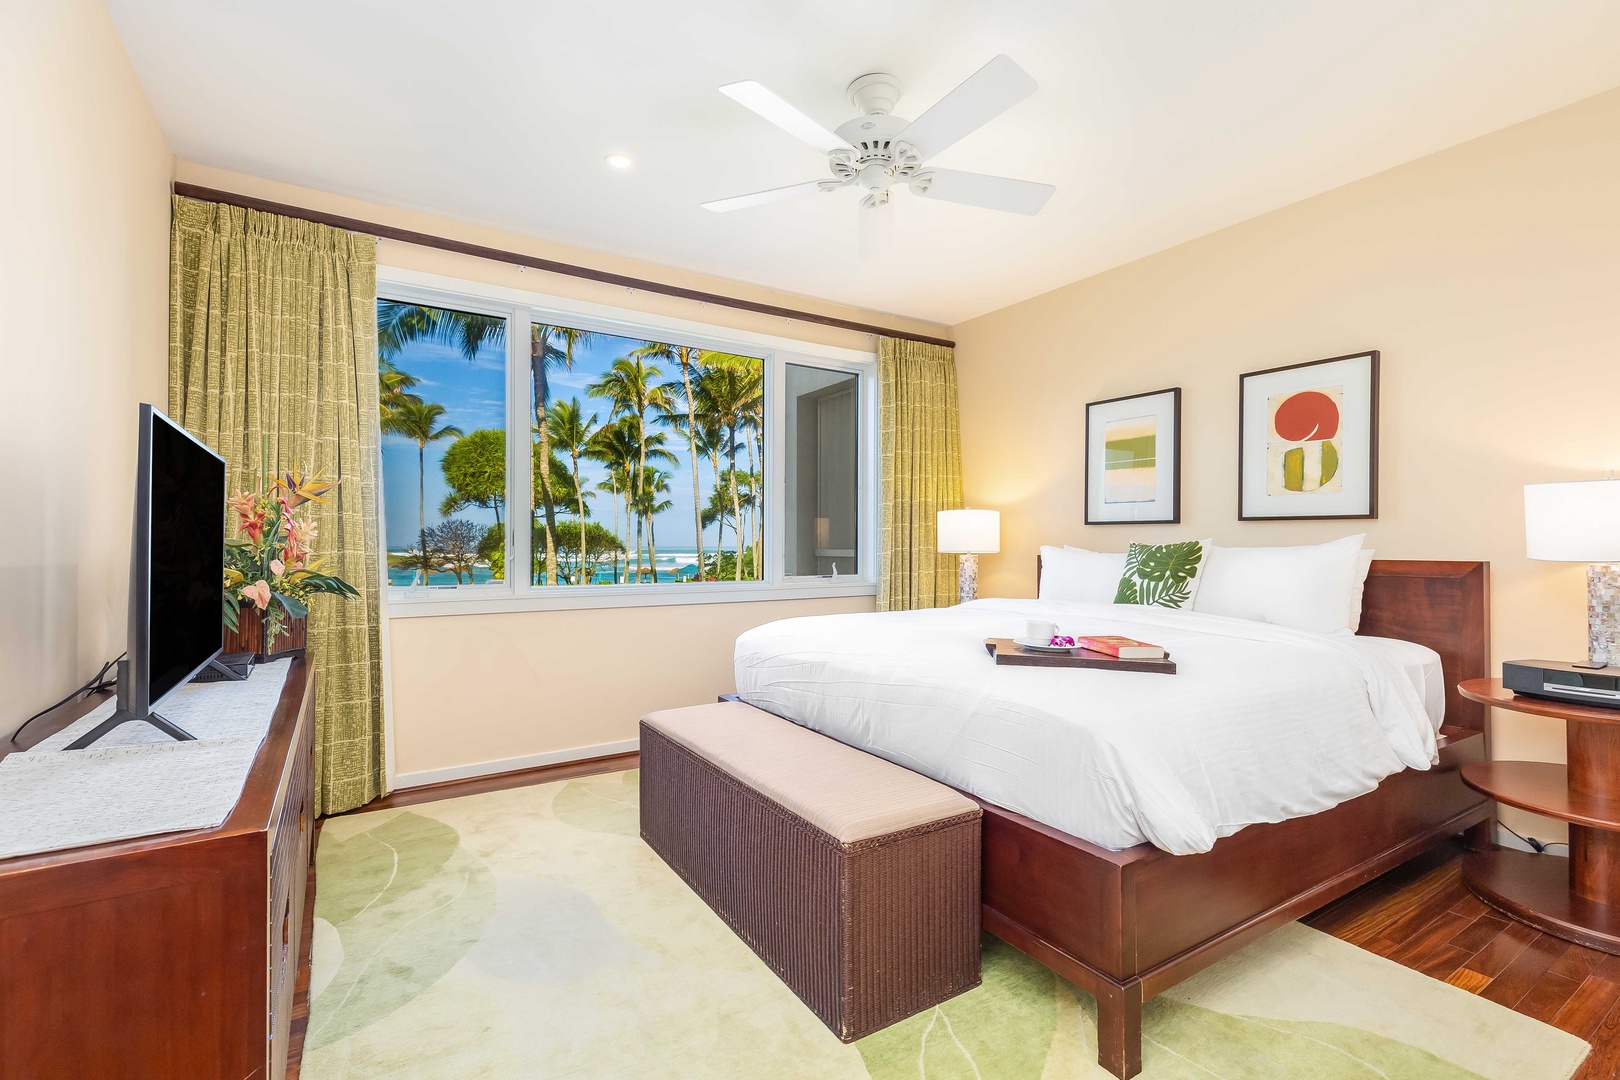 Kahuku Vacation Rentals, Turtle Bay Villas 210 - Walking into the spacious master suite immediately whisks you away to a relaxing sanctuary with its King-size bed, walk-in closet